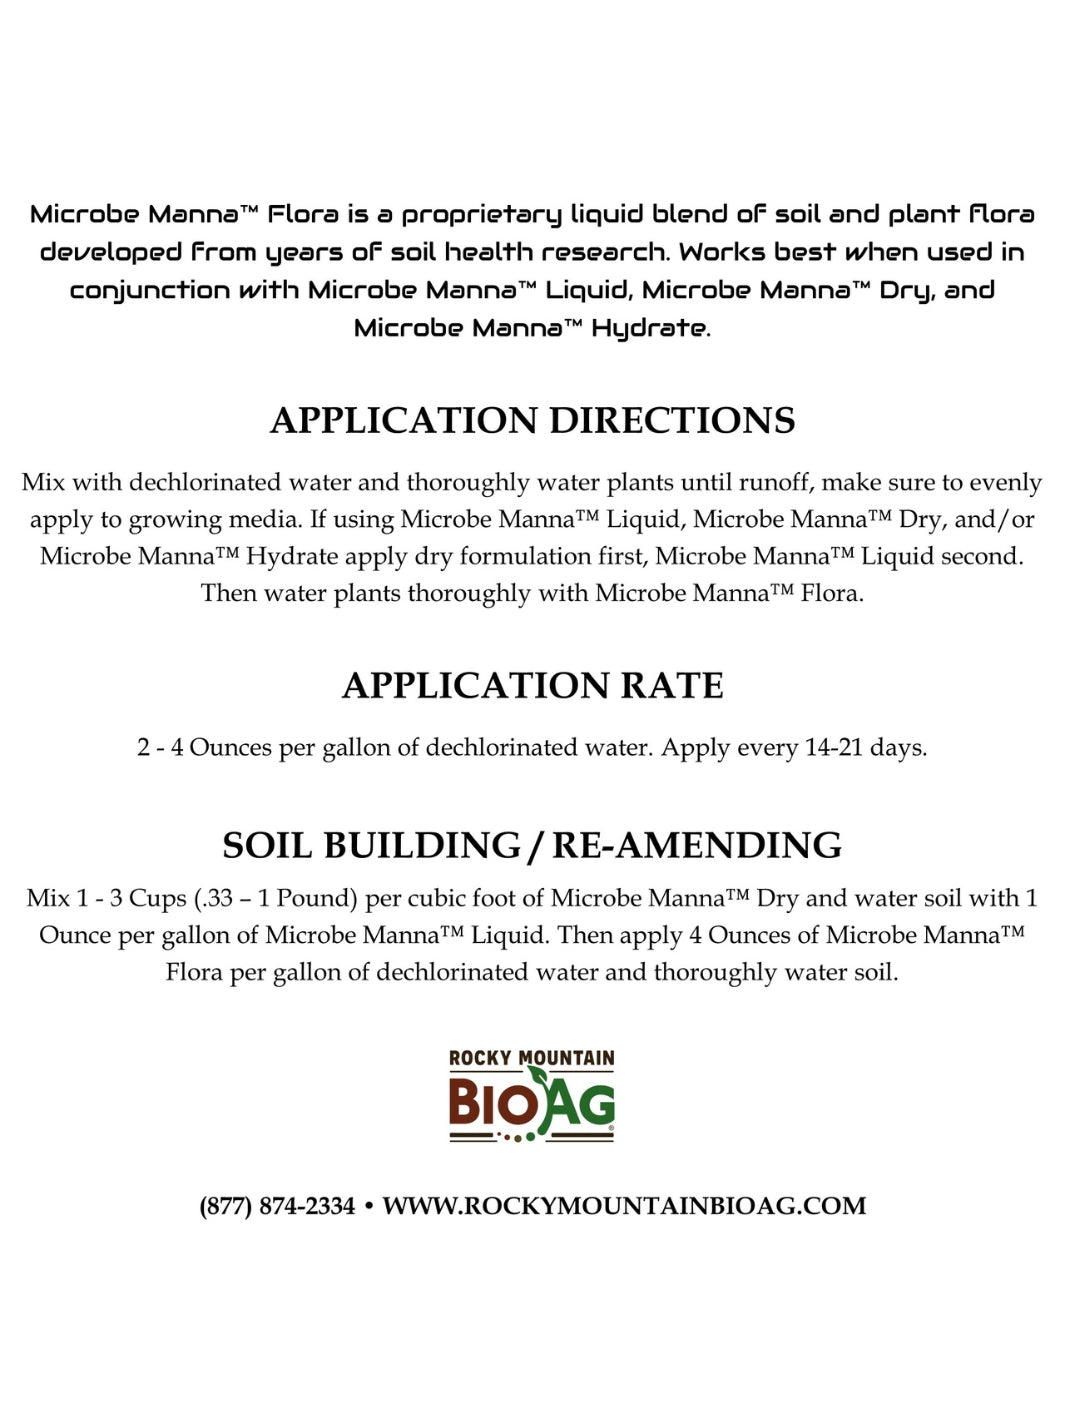 Microbe Manna™ Flora soil microbes exclusively from Rocky Mountain BioAg® Directions and Application Rate